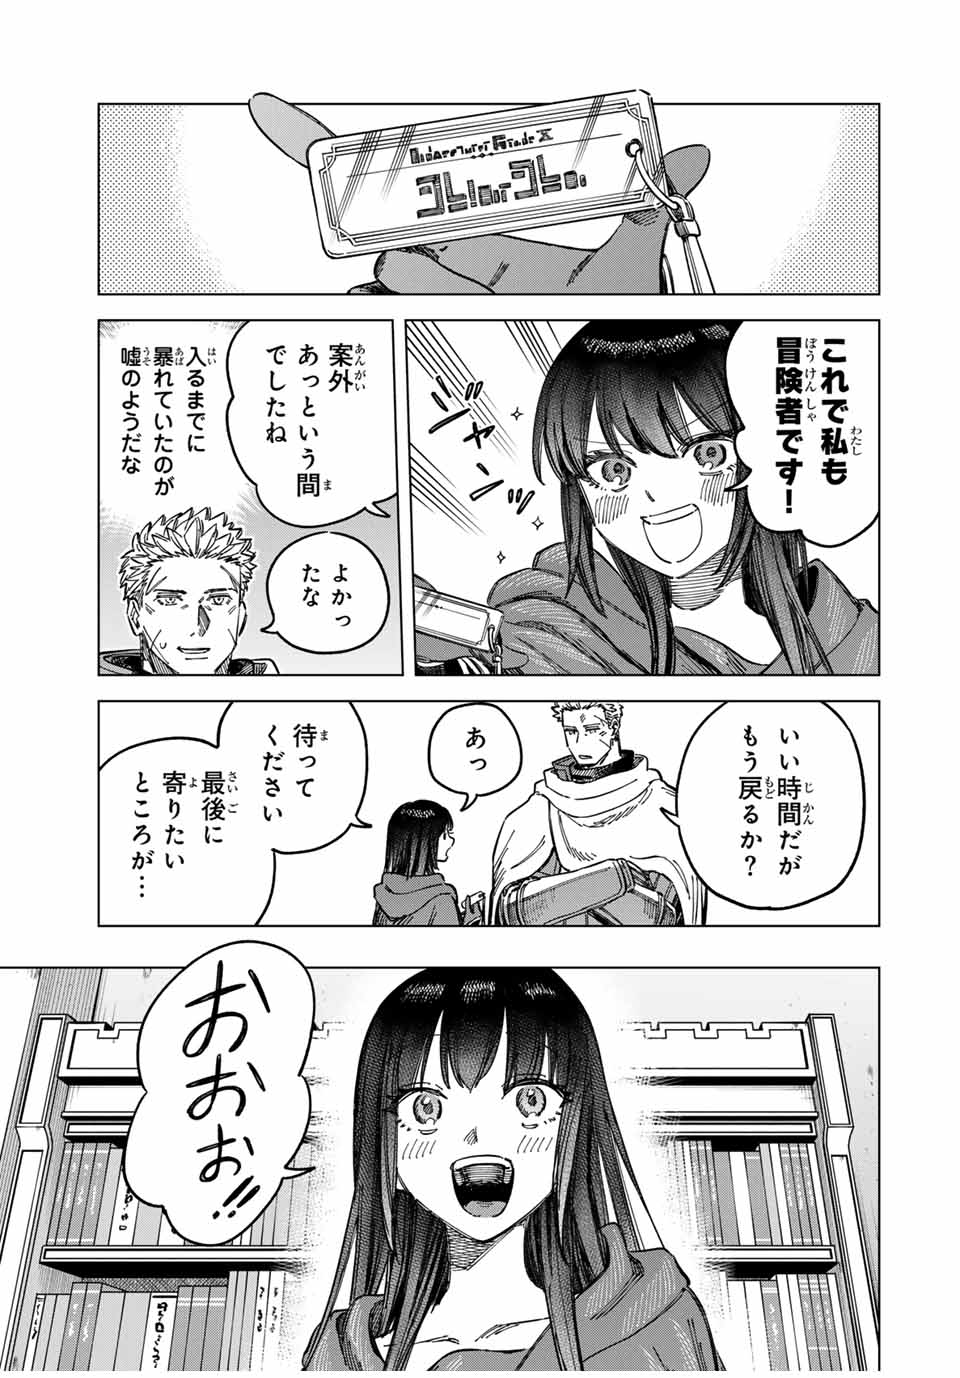 Witch and Mercenary 魔女と傭兵 第5.1話 - Page 9